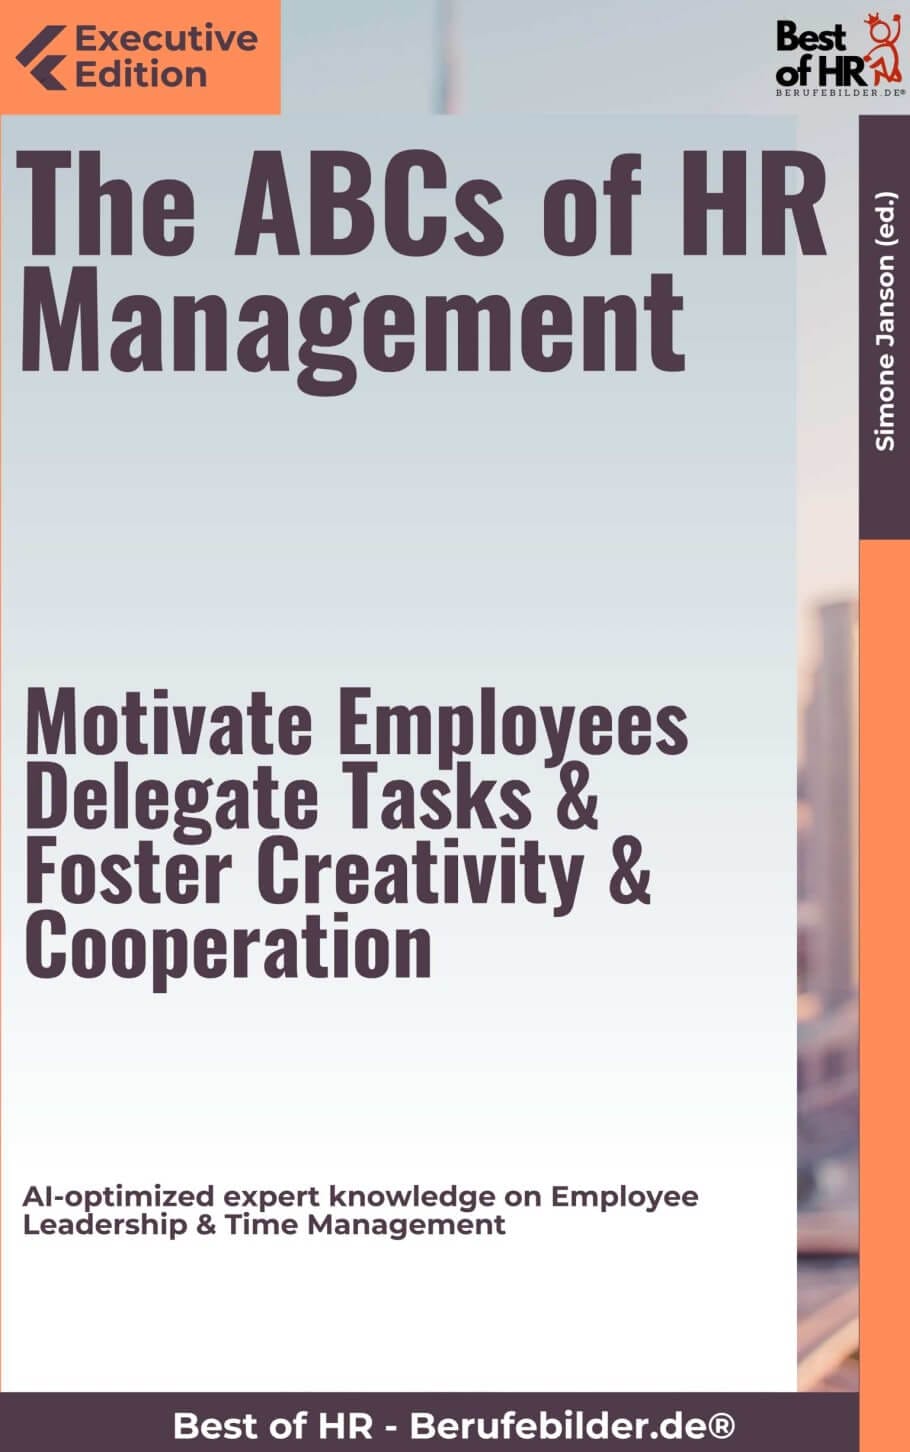 The ABCs of HR Management – Motivate Employees, Delegate Tasks, & Foster Creativity & Cooperation (Engl. Version)